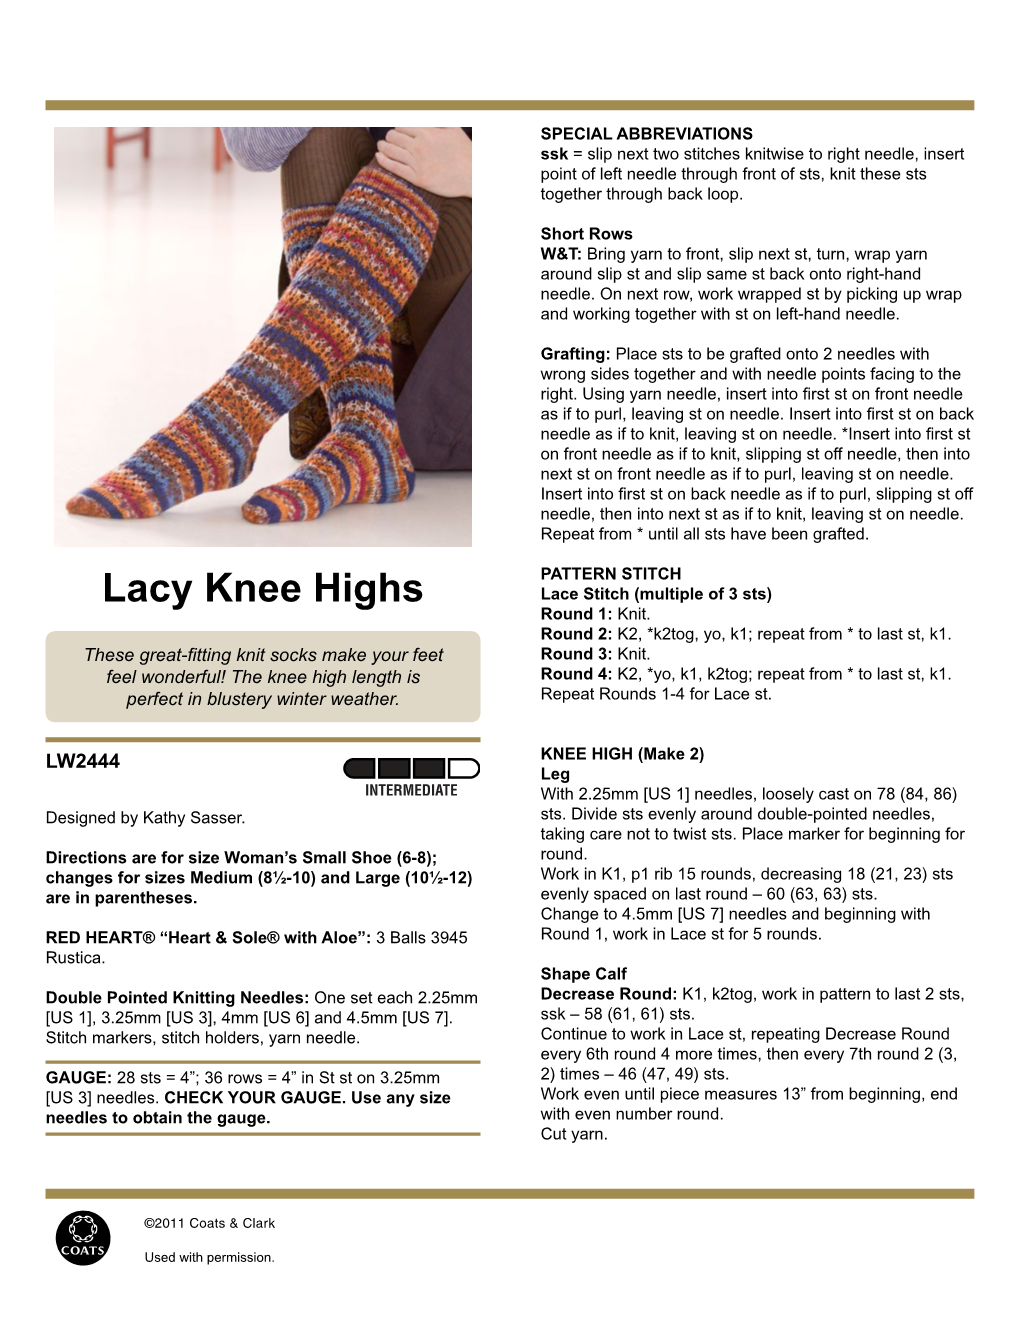 Lacy Knee Highs Lace Stitch (Multiple of 3 Sts) Round 1: Knit